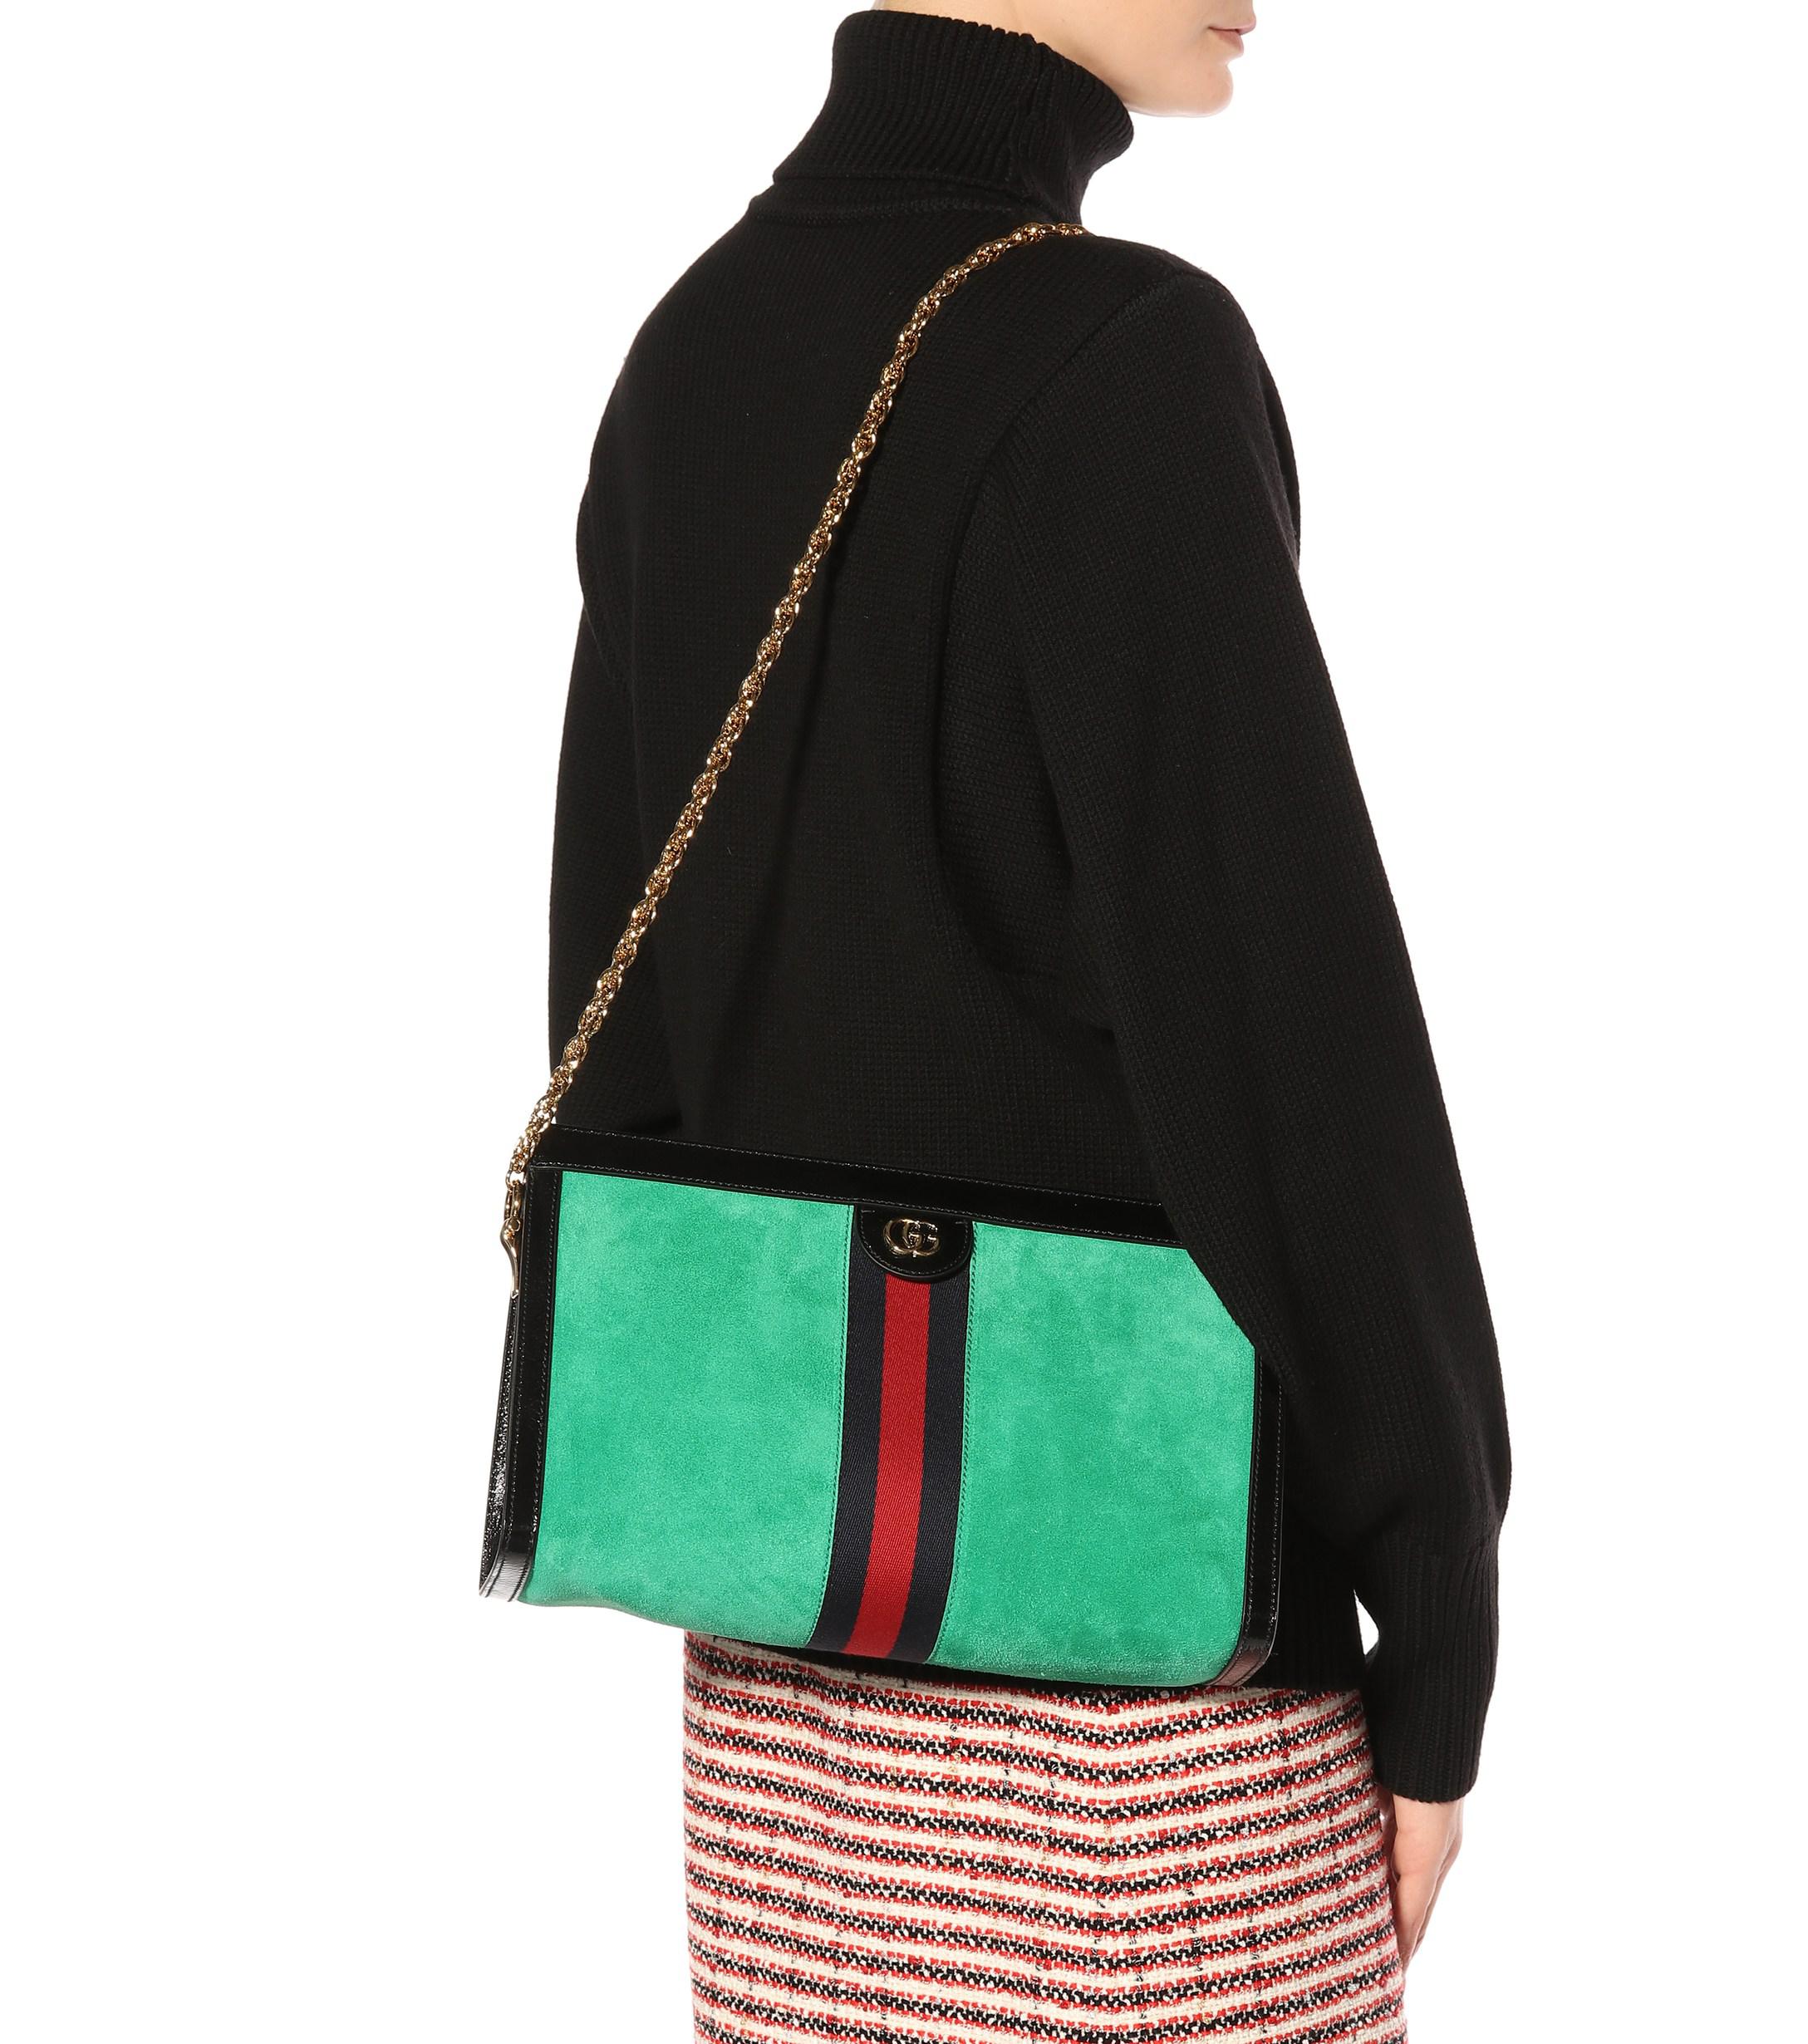 Gucci Ophidia Small Suede Shoulder Bag in Green - Lyst